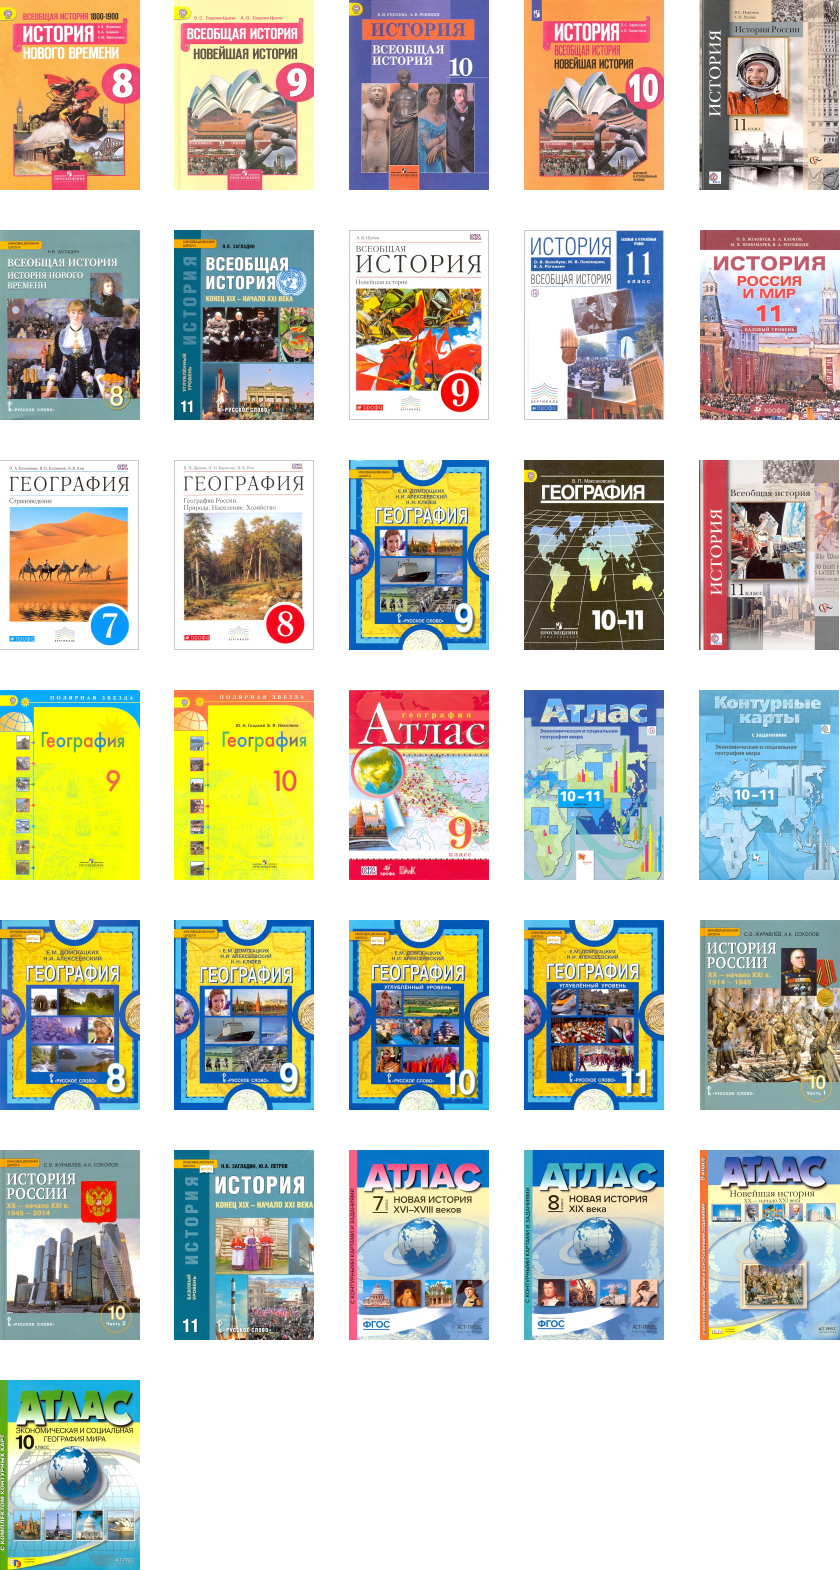 Image - Russia, 31 Social Textbooks